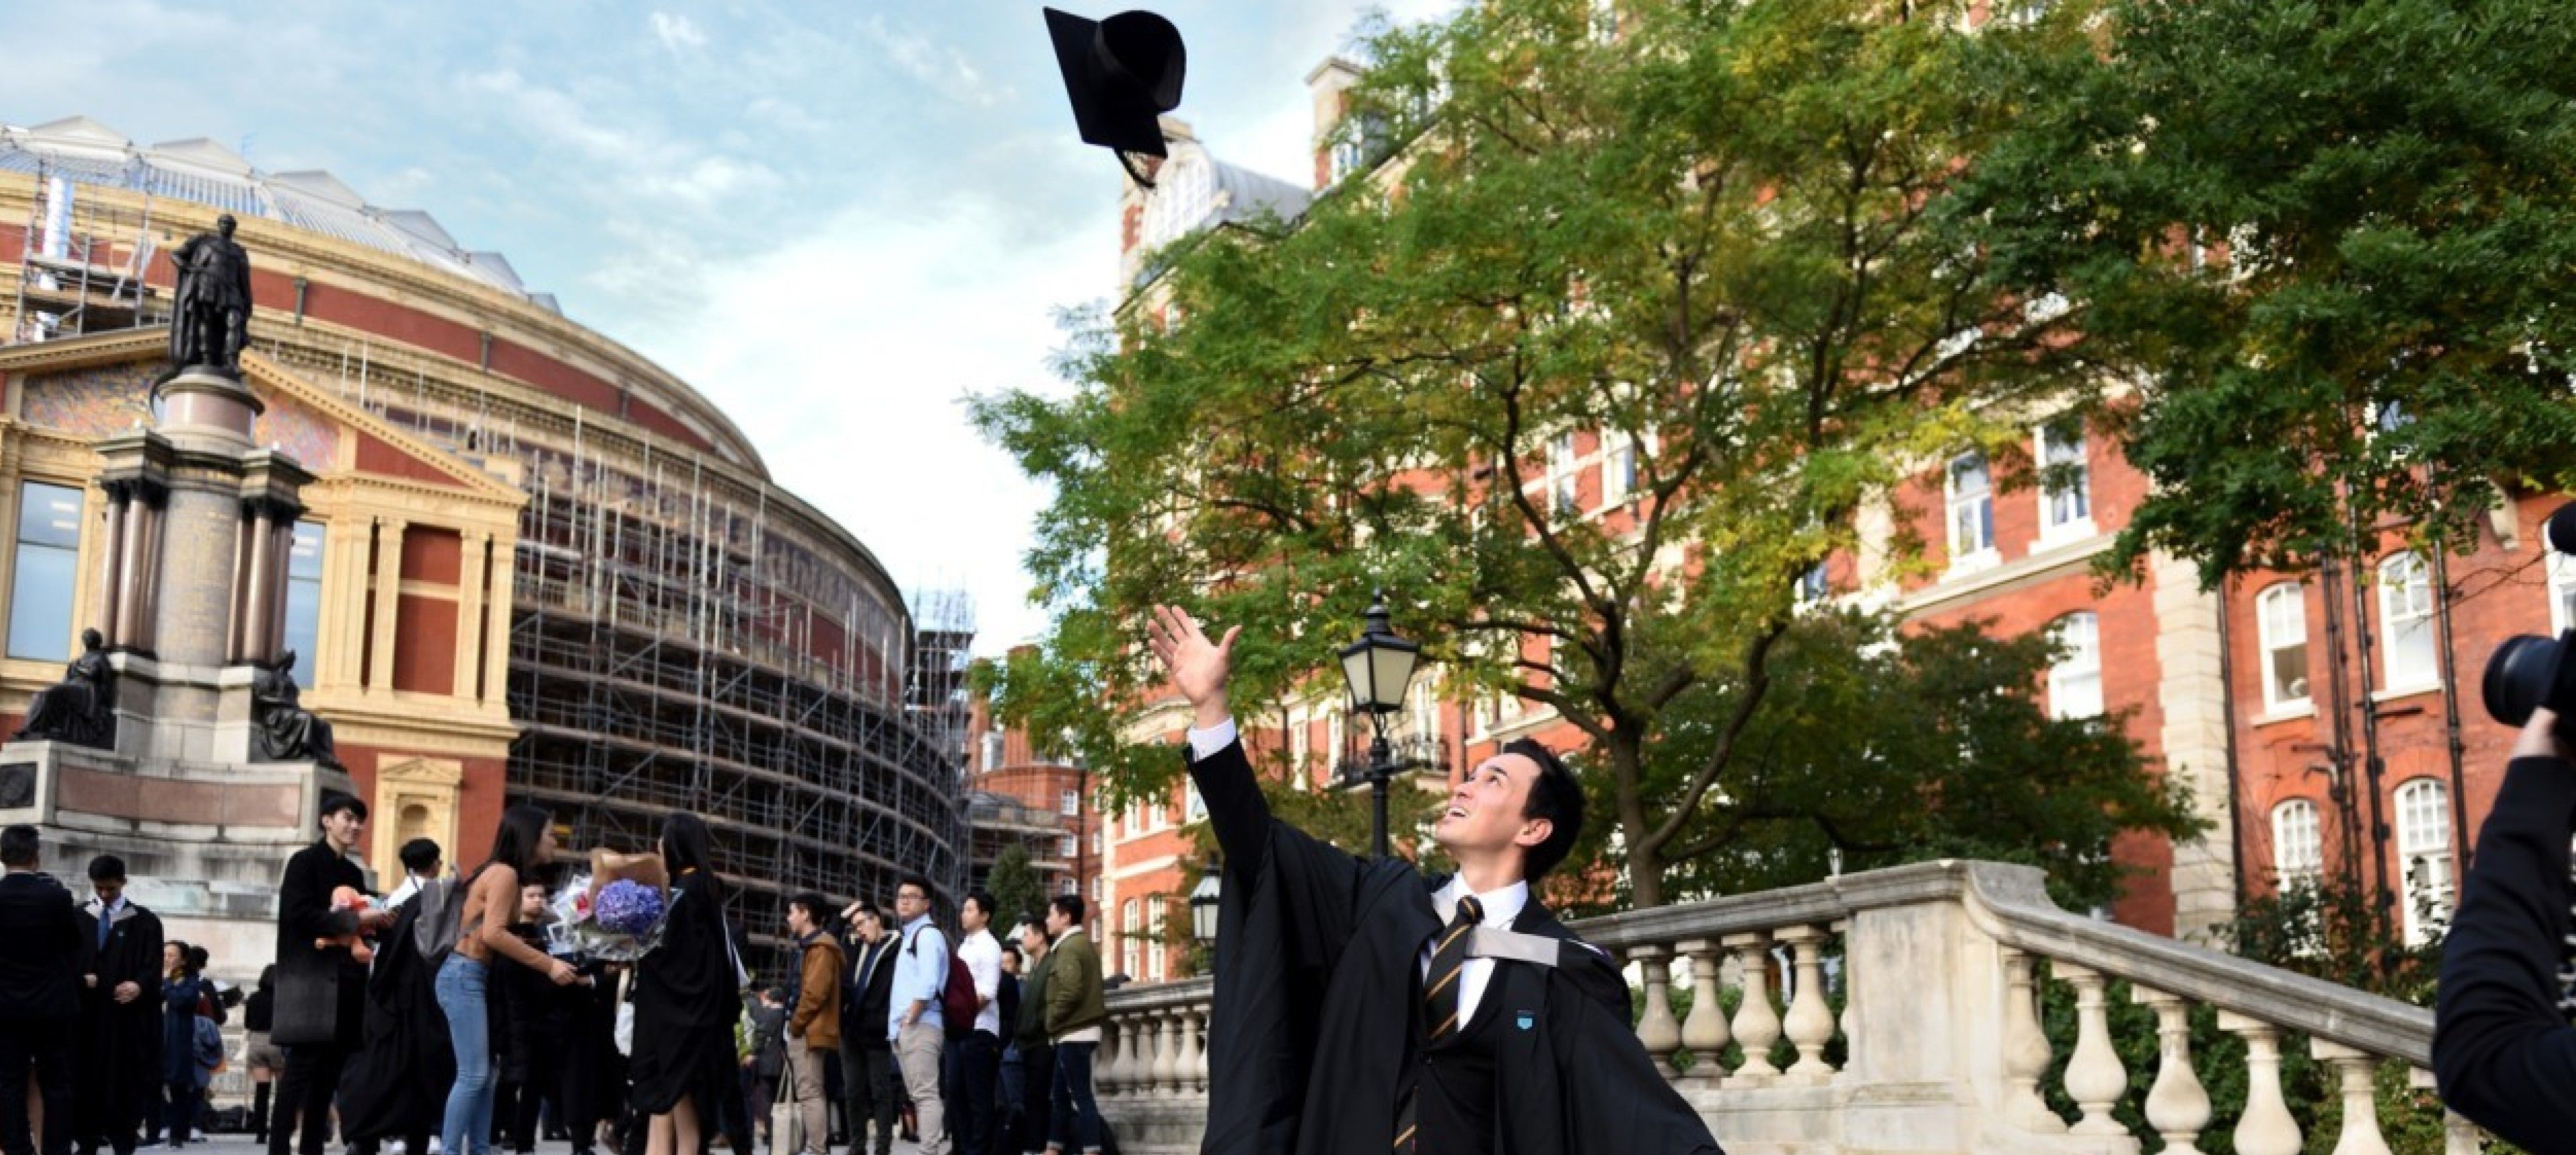 A graduand throwing his mortar board in the air on the steps in front of the Royal Albert Hall